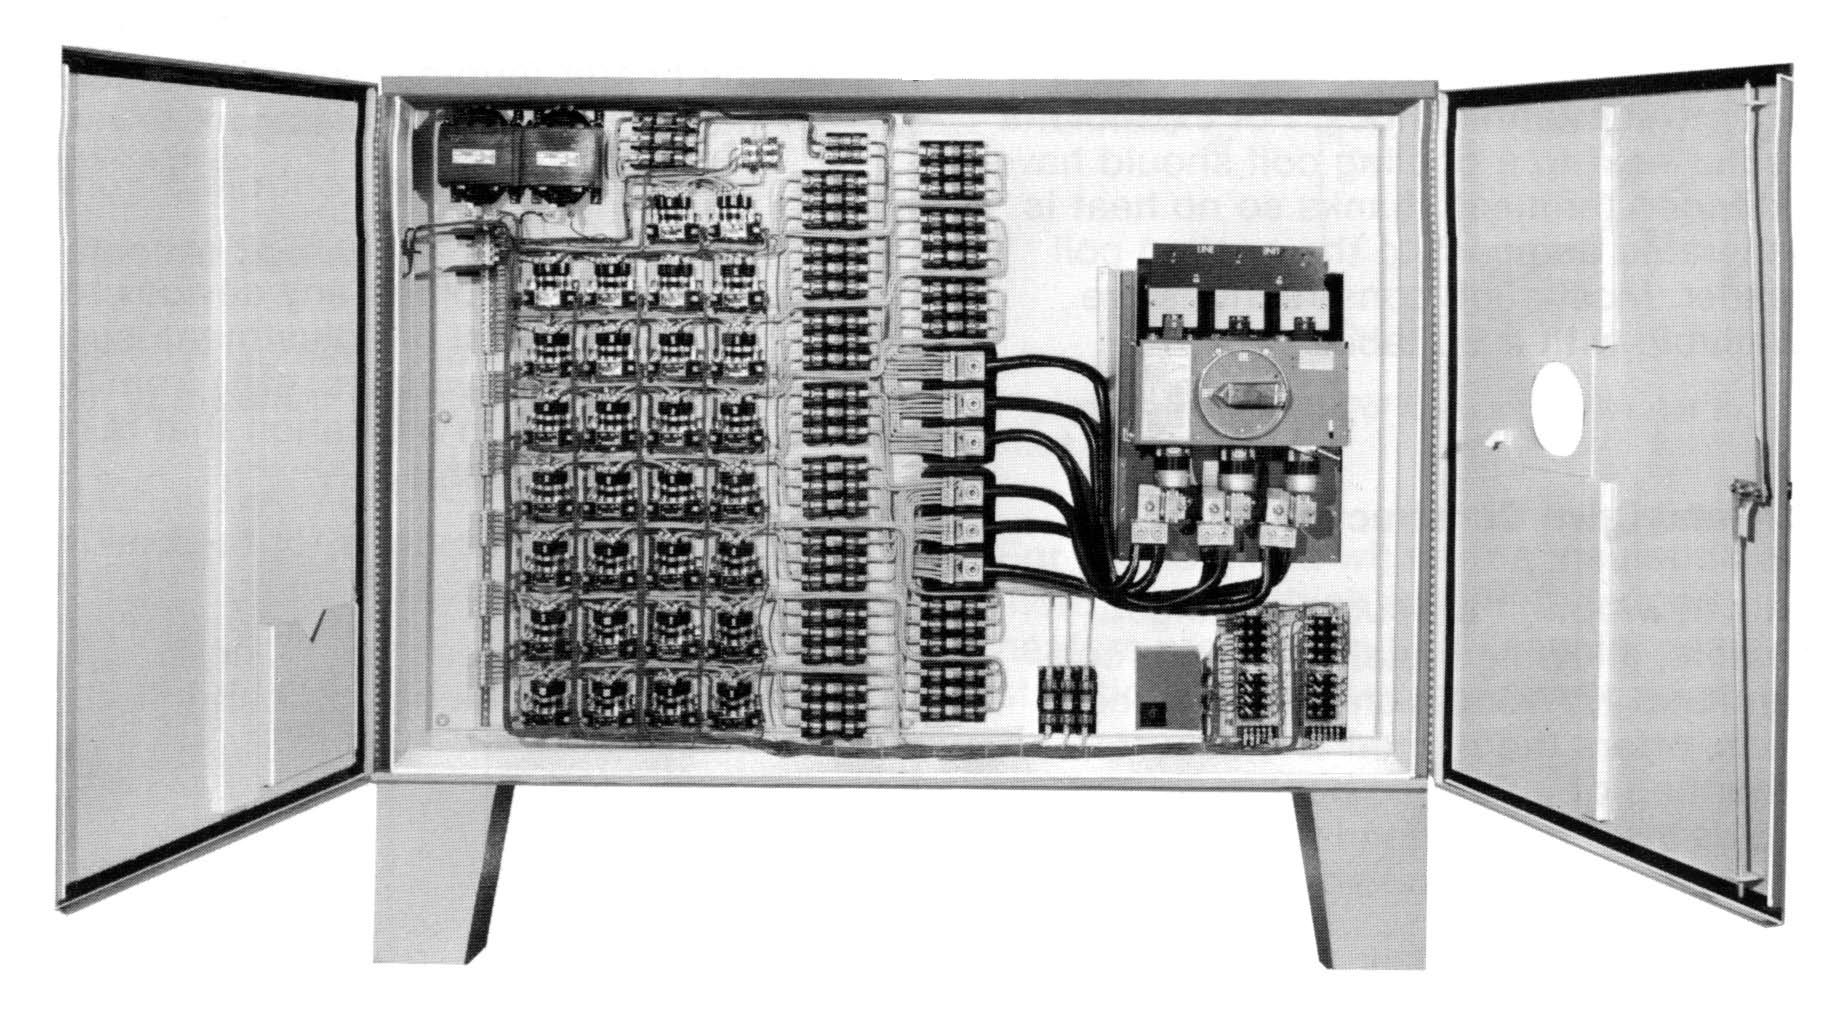 Remote_Panelboard_for_Duct_Heaters